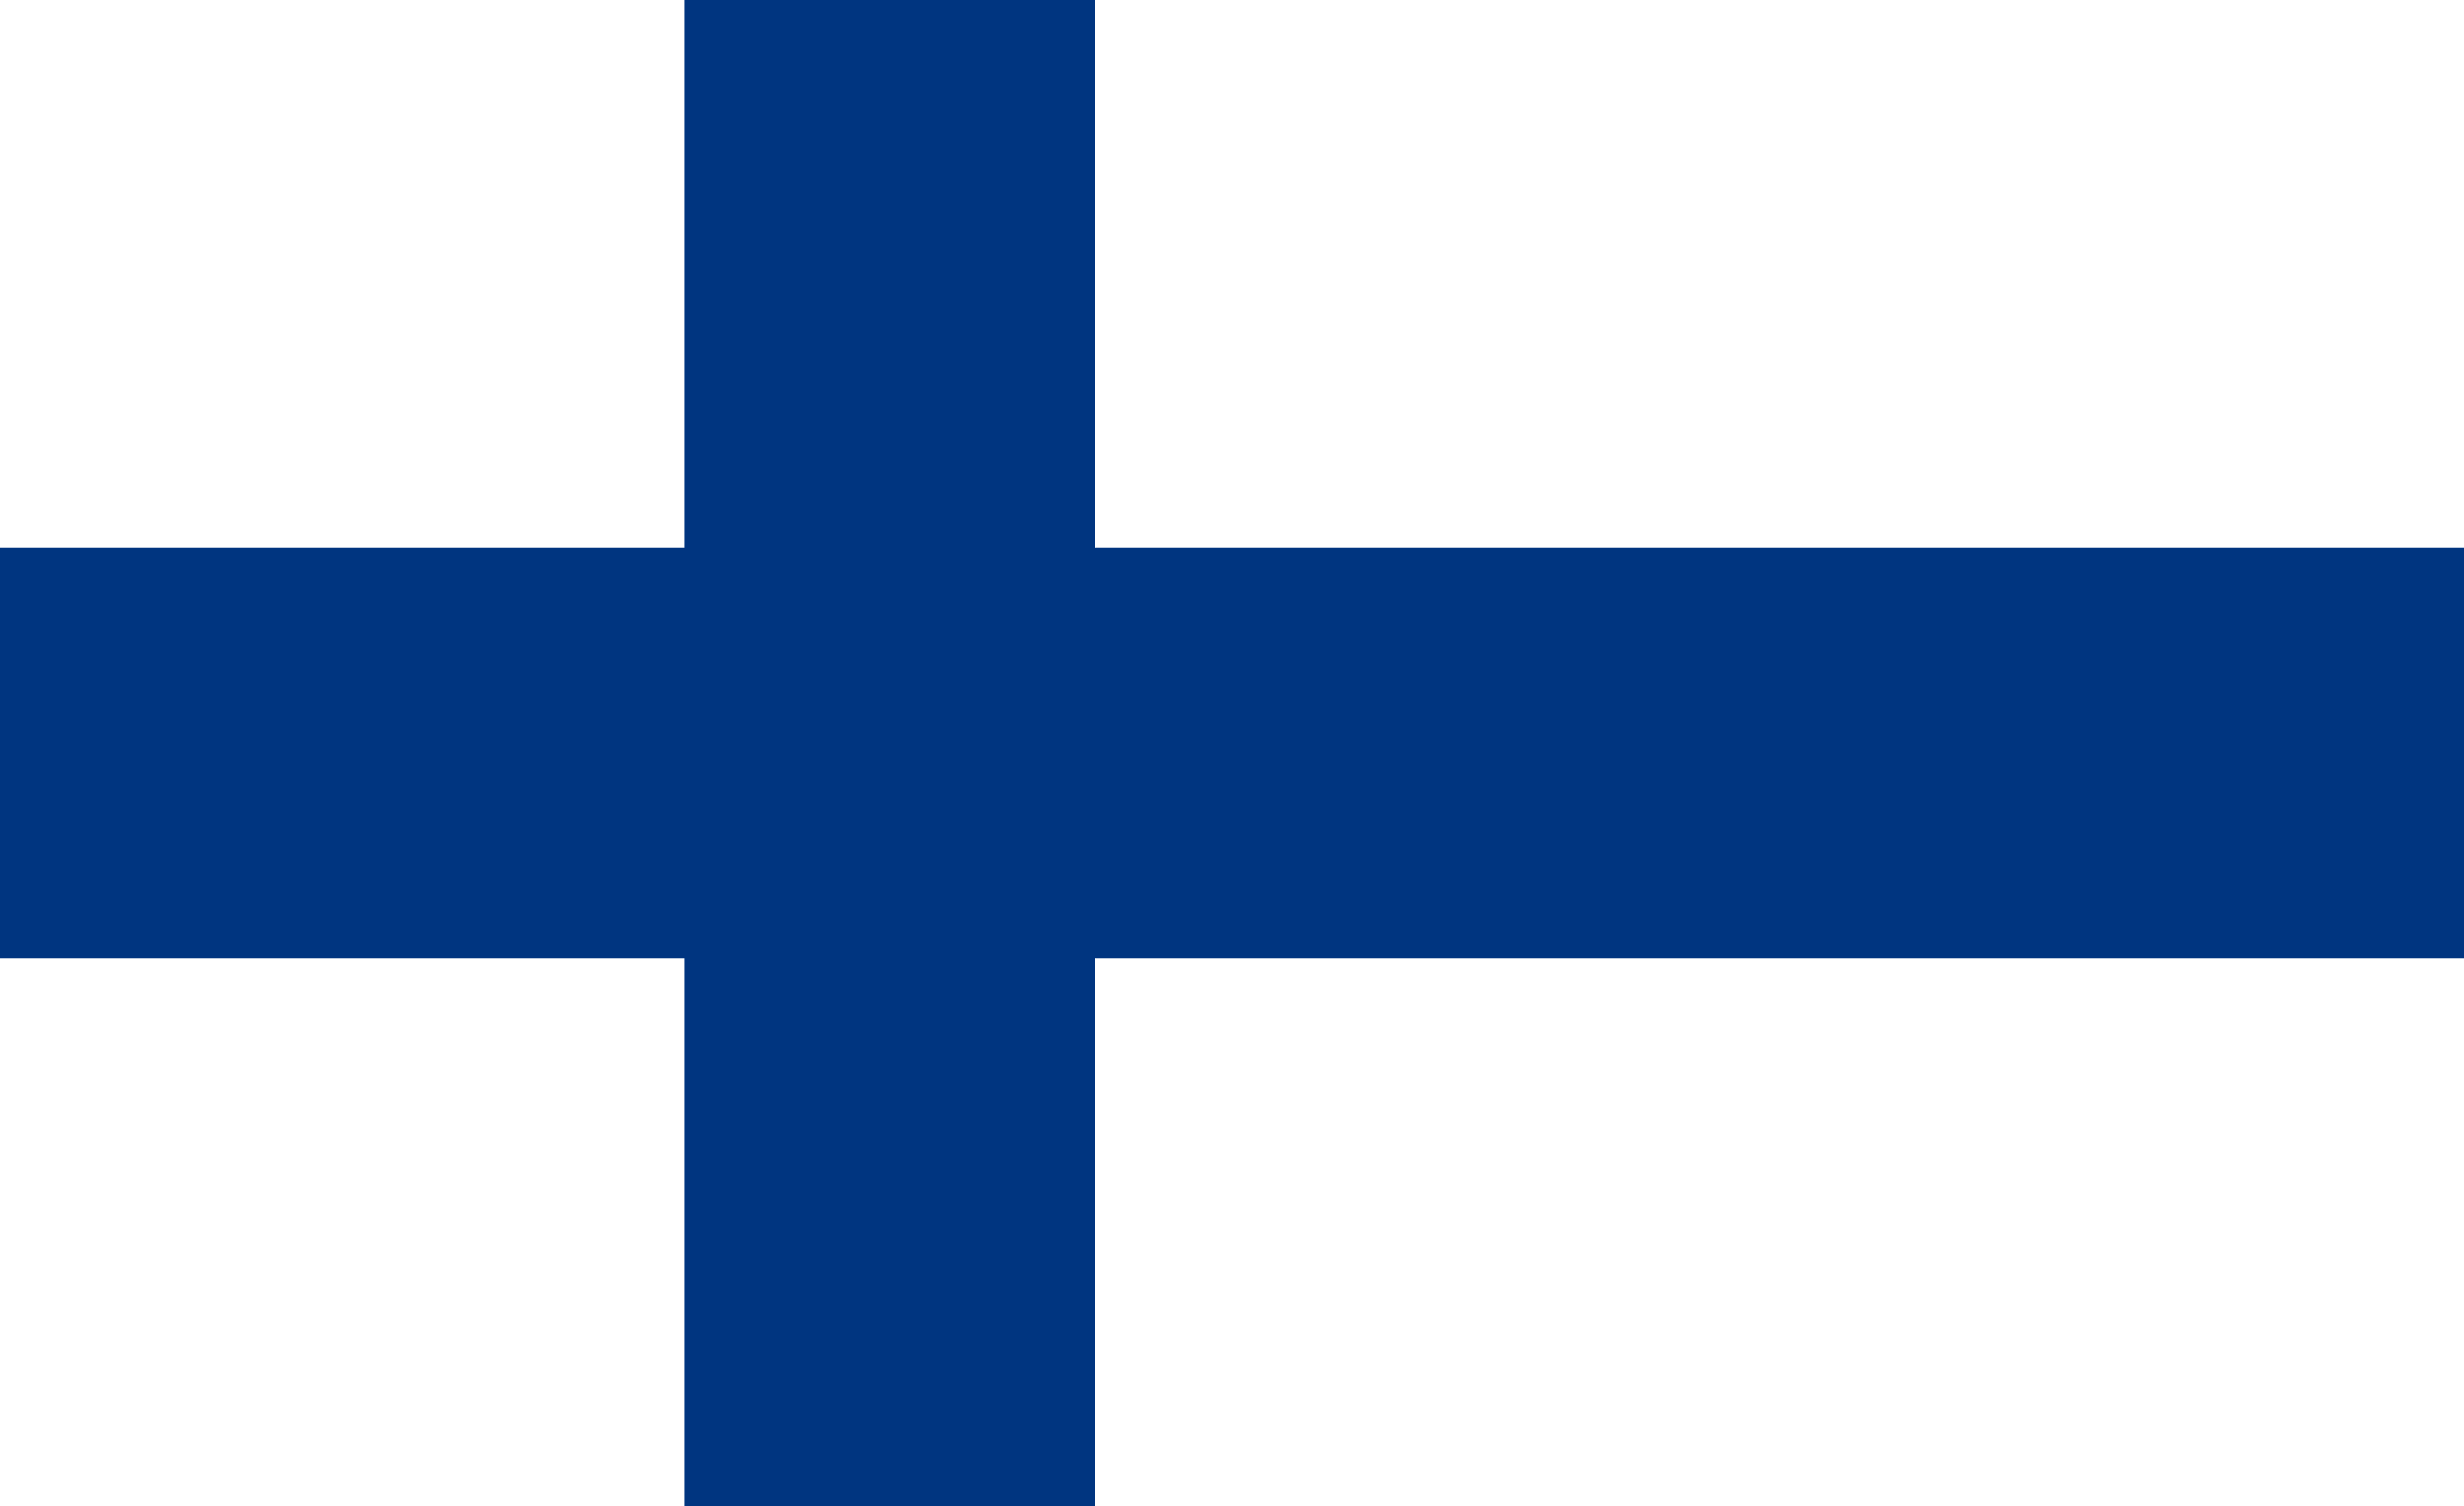 Finland Flag Vector - Free Download